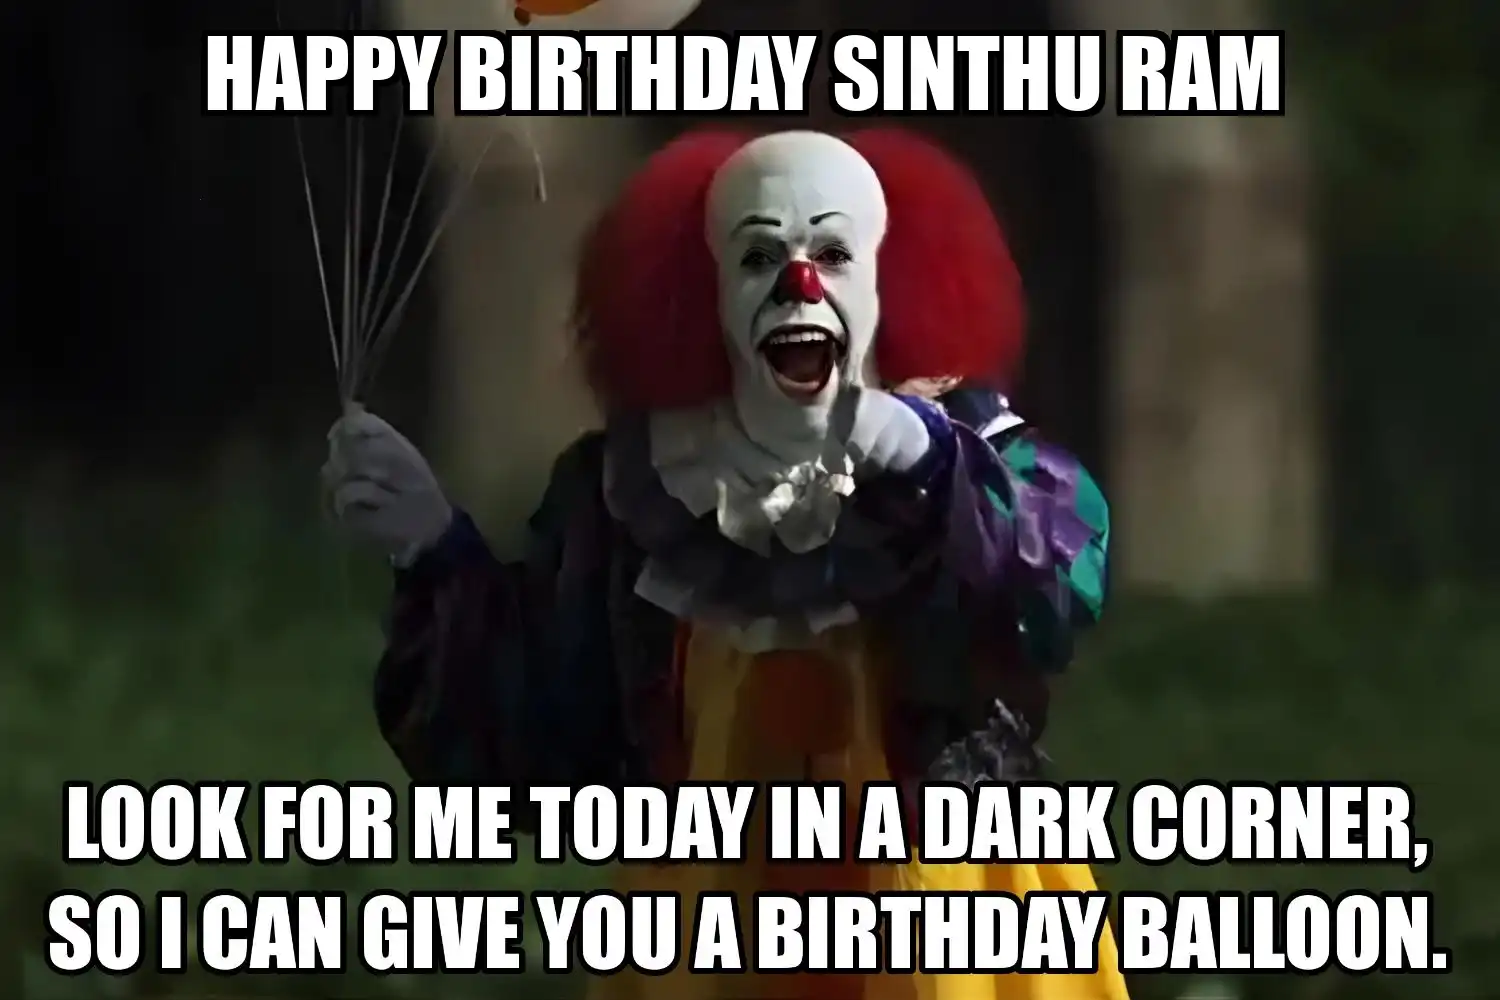 Happy Birthday Sinthu ram I Can Give You A Balloon Meme